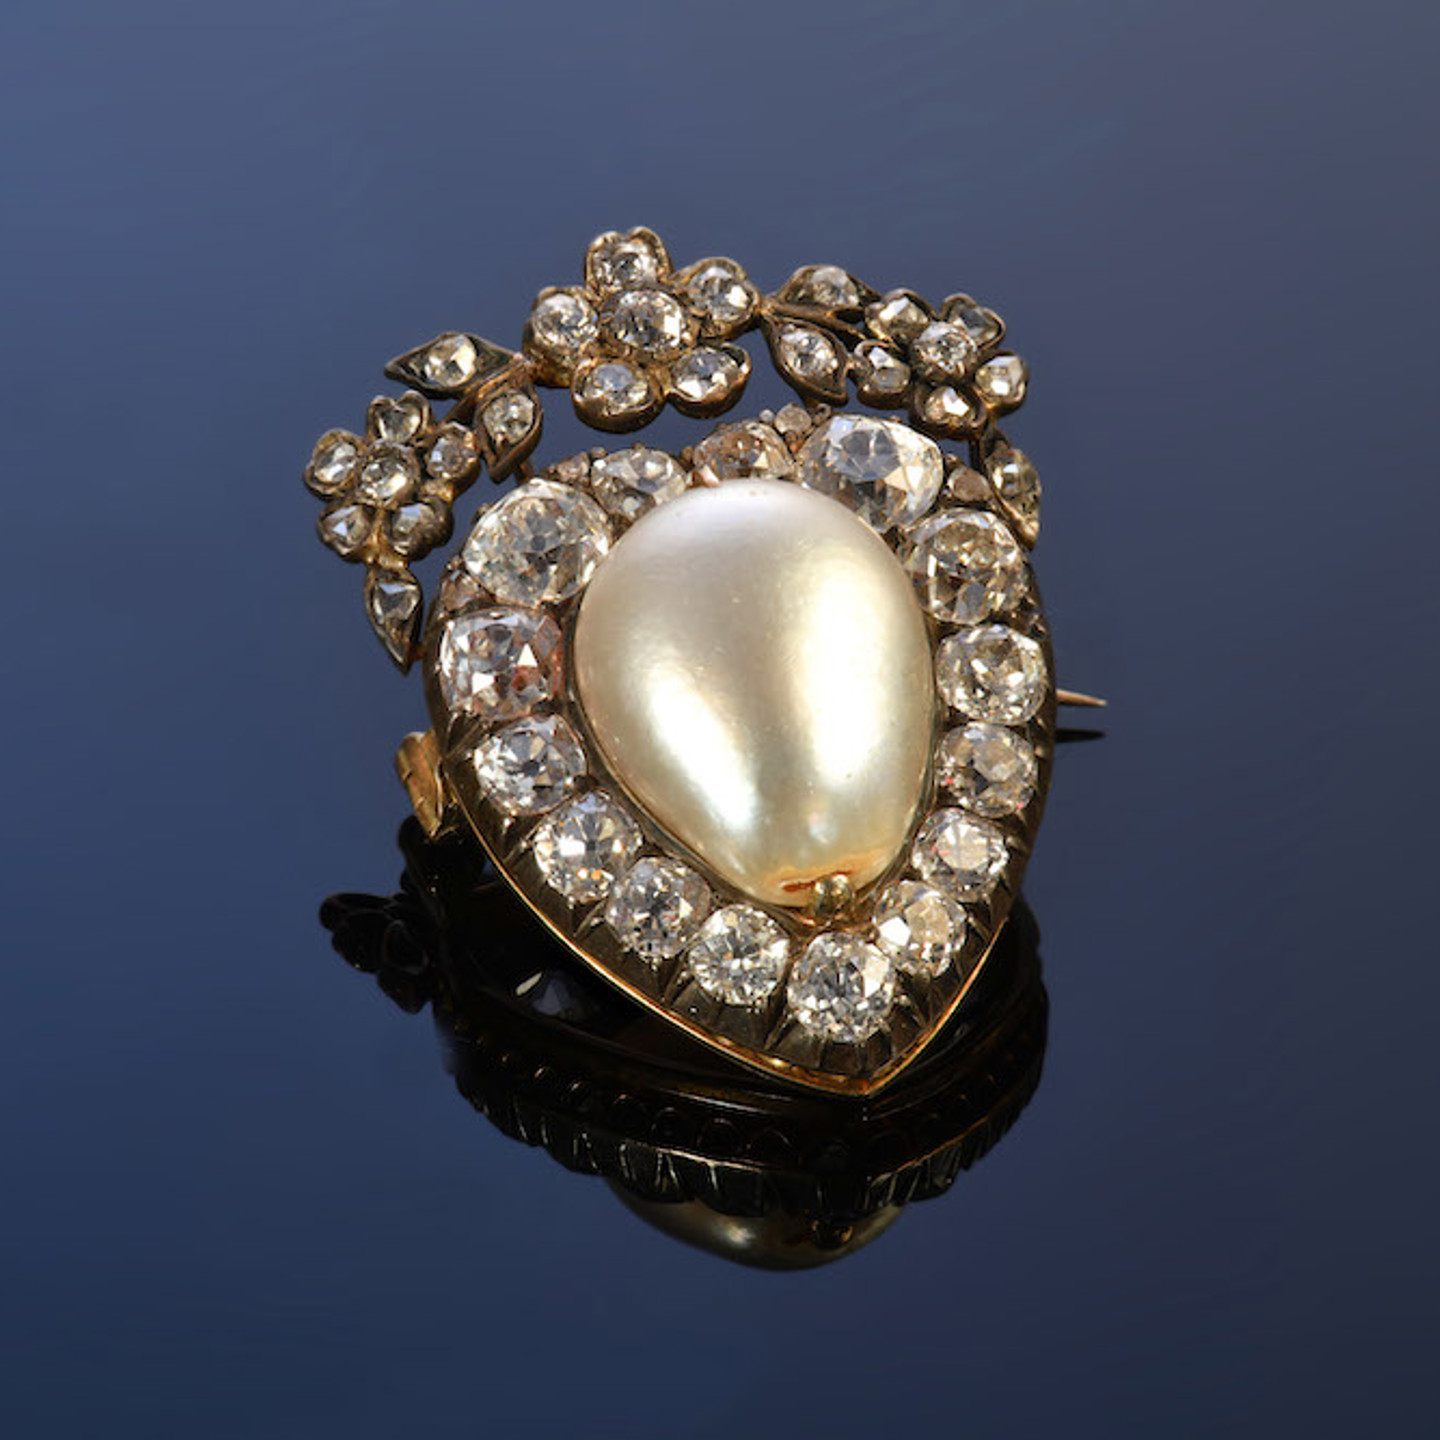 Victorian Brooch In The Form Of A Heart Set With A Large Natural Pearl Surrounded By Diamonds. Sold For £8400